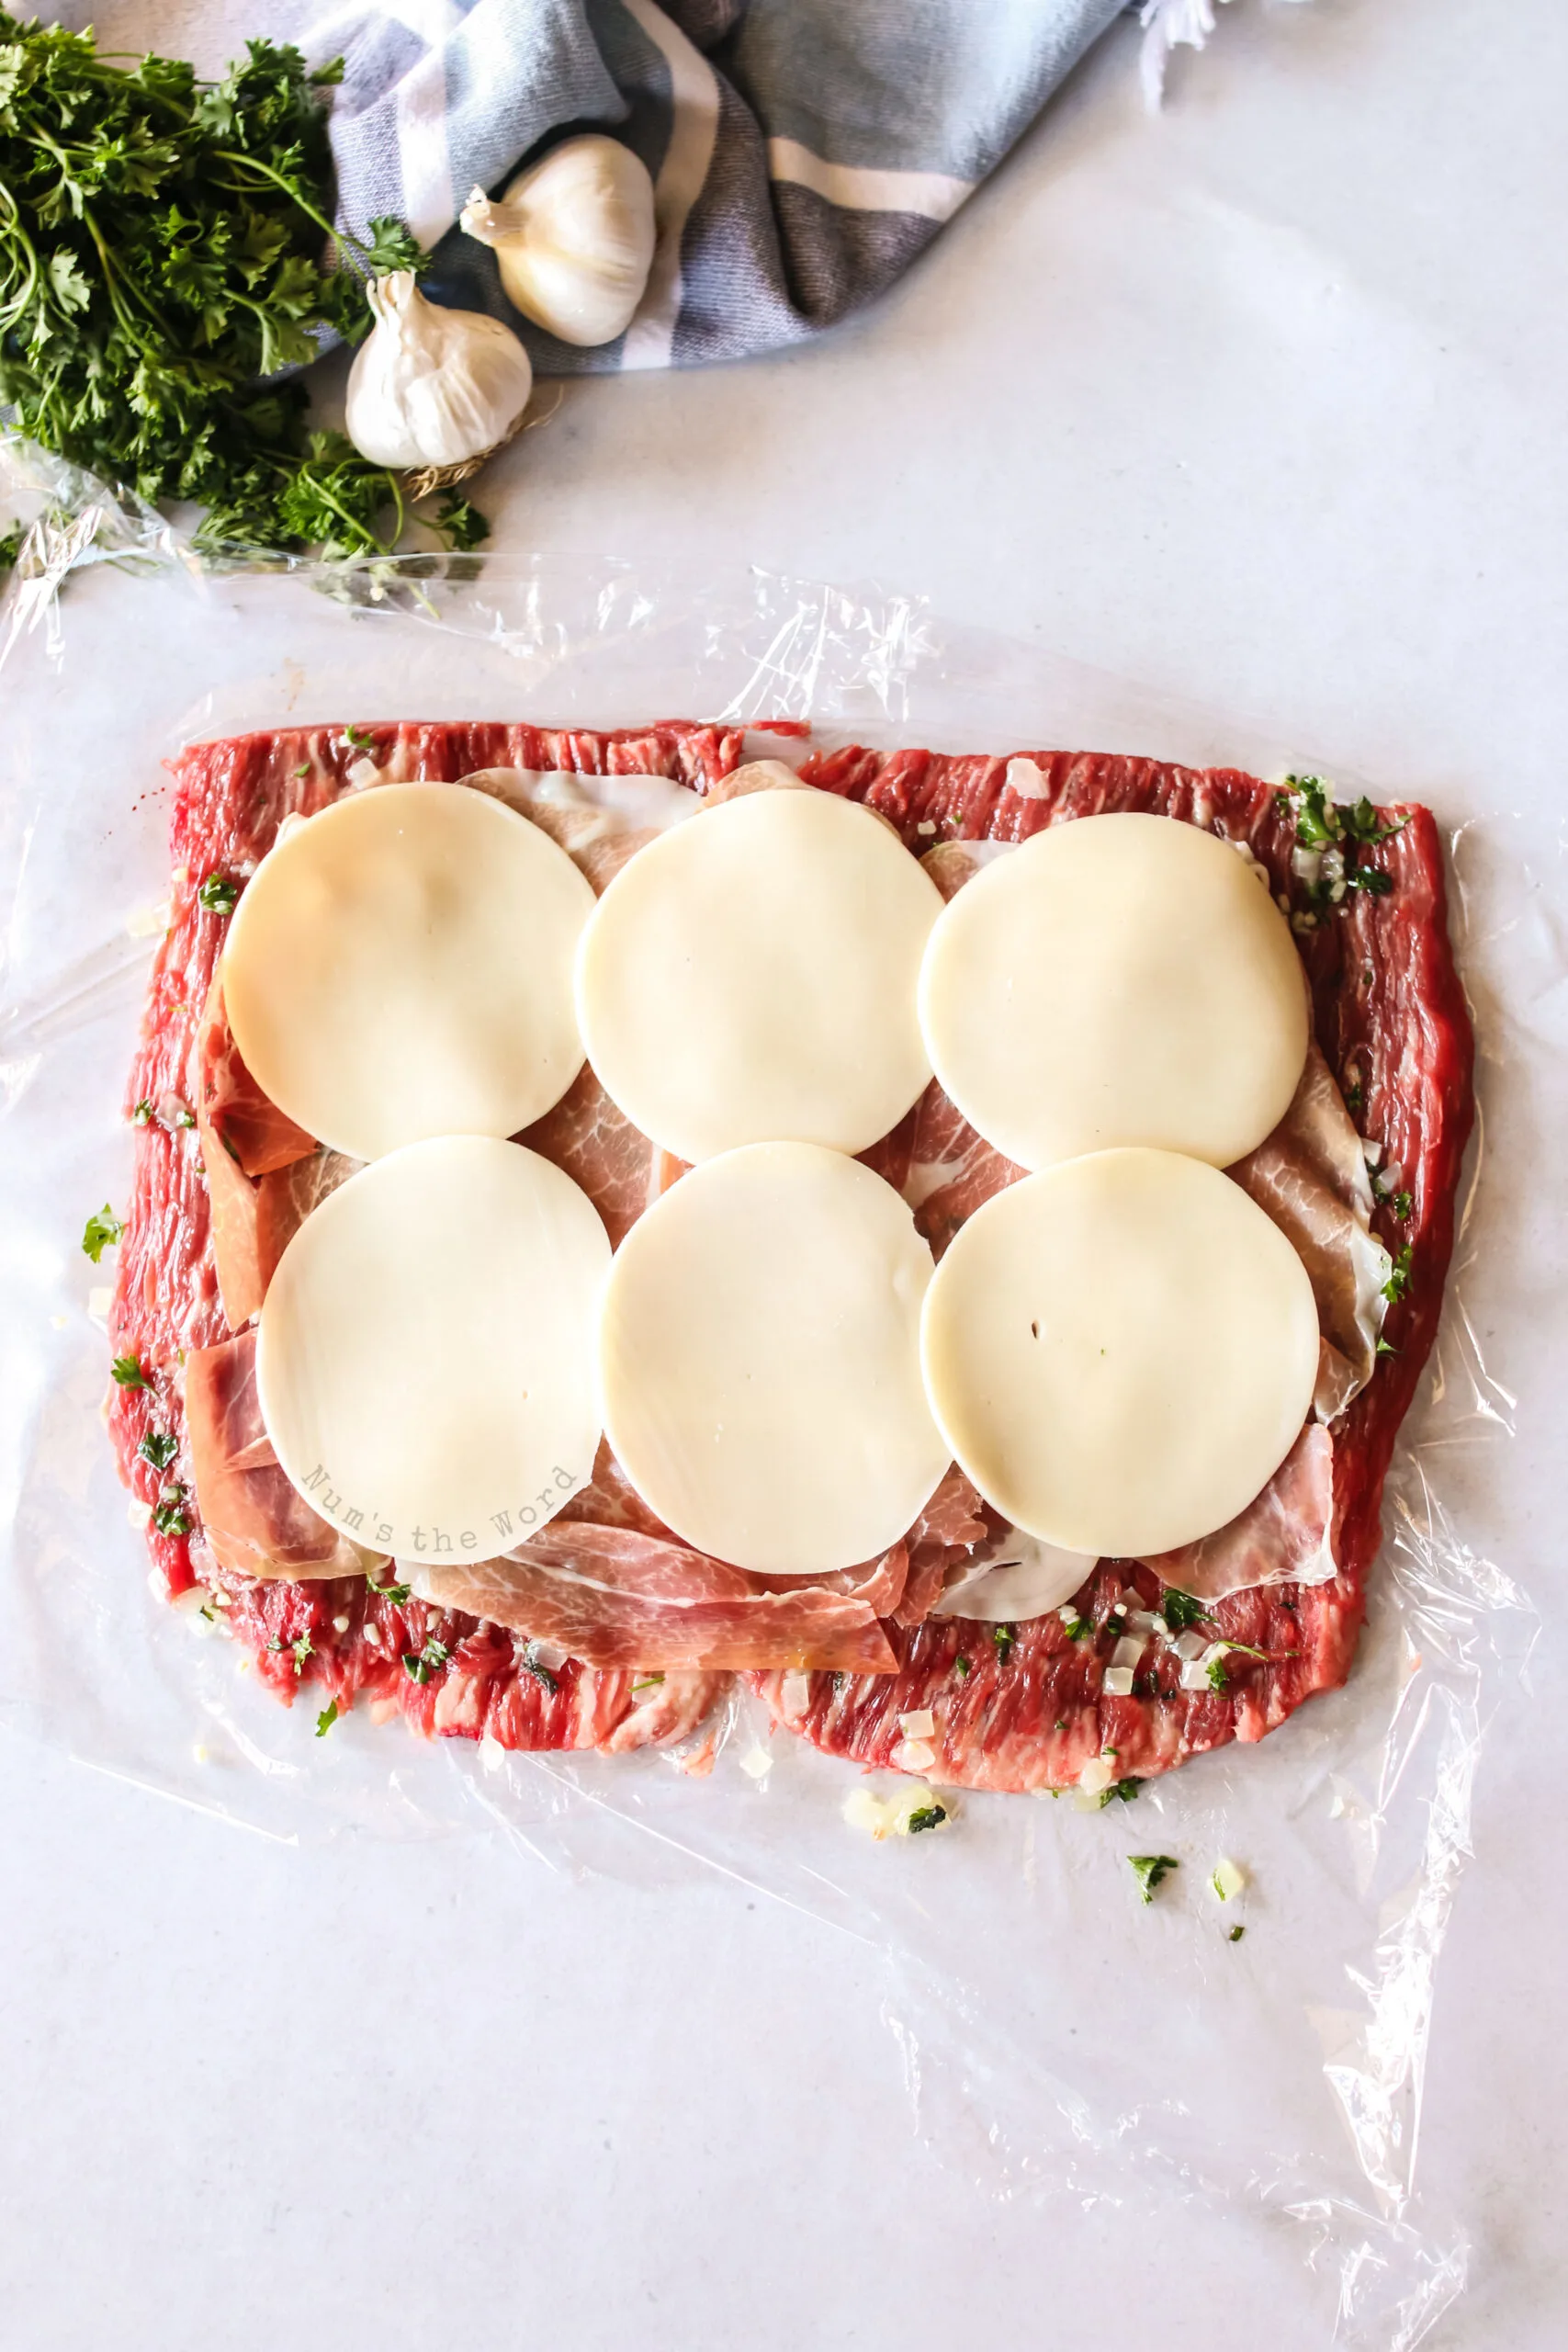 provolone cheese laid on top of prosciutto